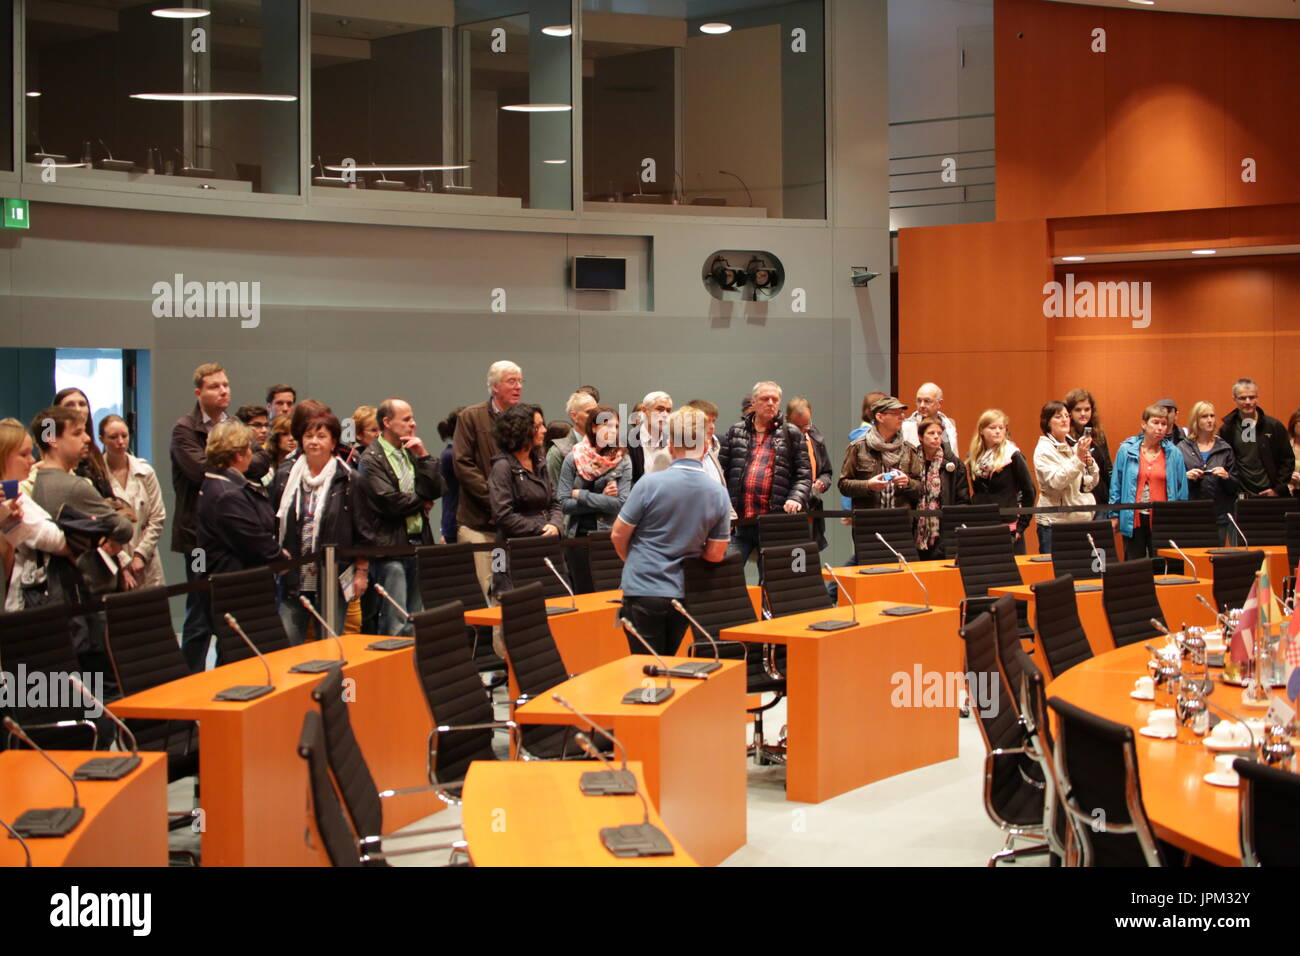 Berlin, Germany, 31st August, 2014: Chancellor Angela Merkel welcomes visitors to open day Chancellery. Stock Photo